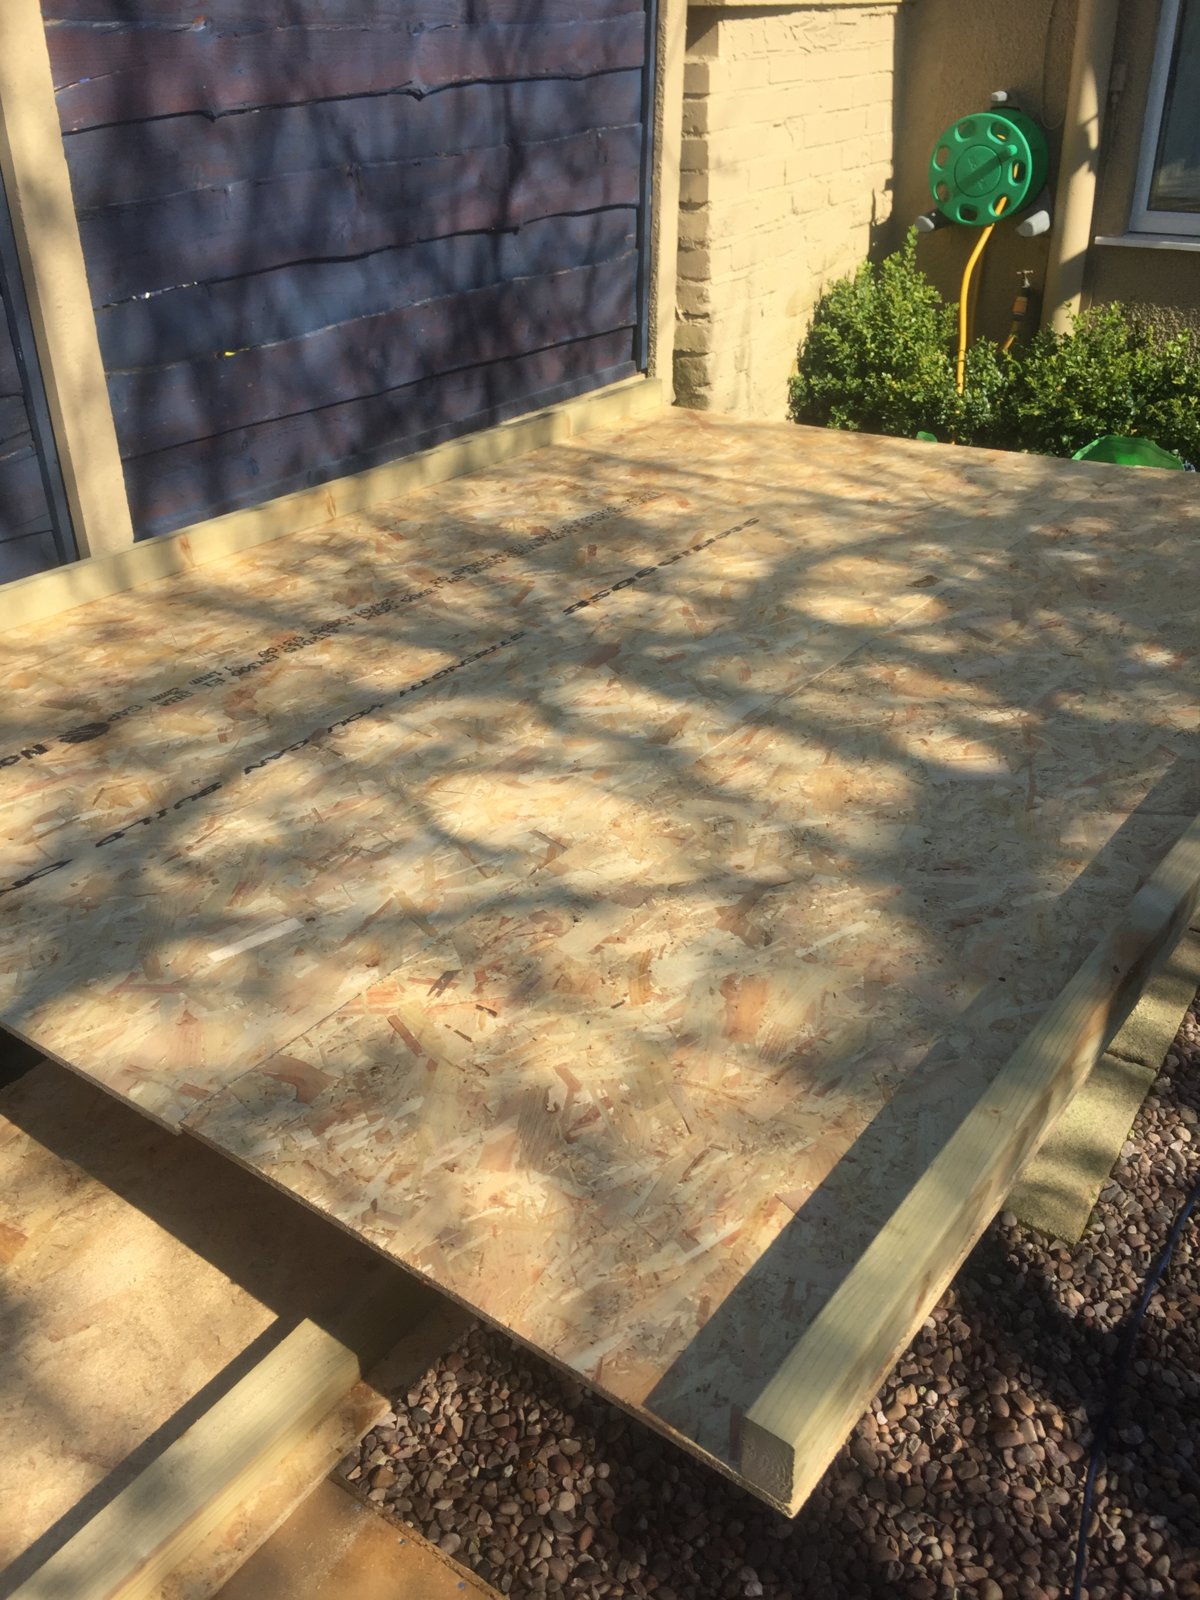 Garden shed and other projects | DIYnot Forums